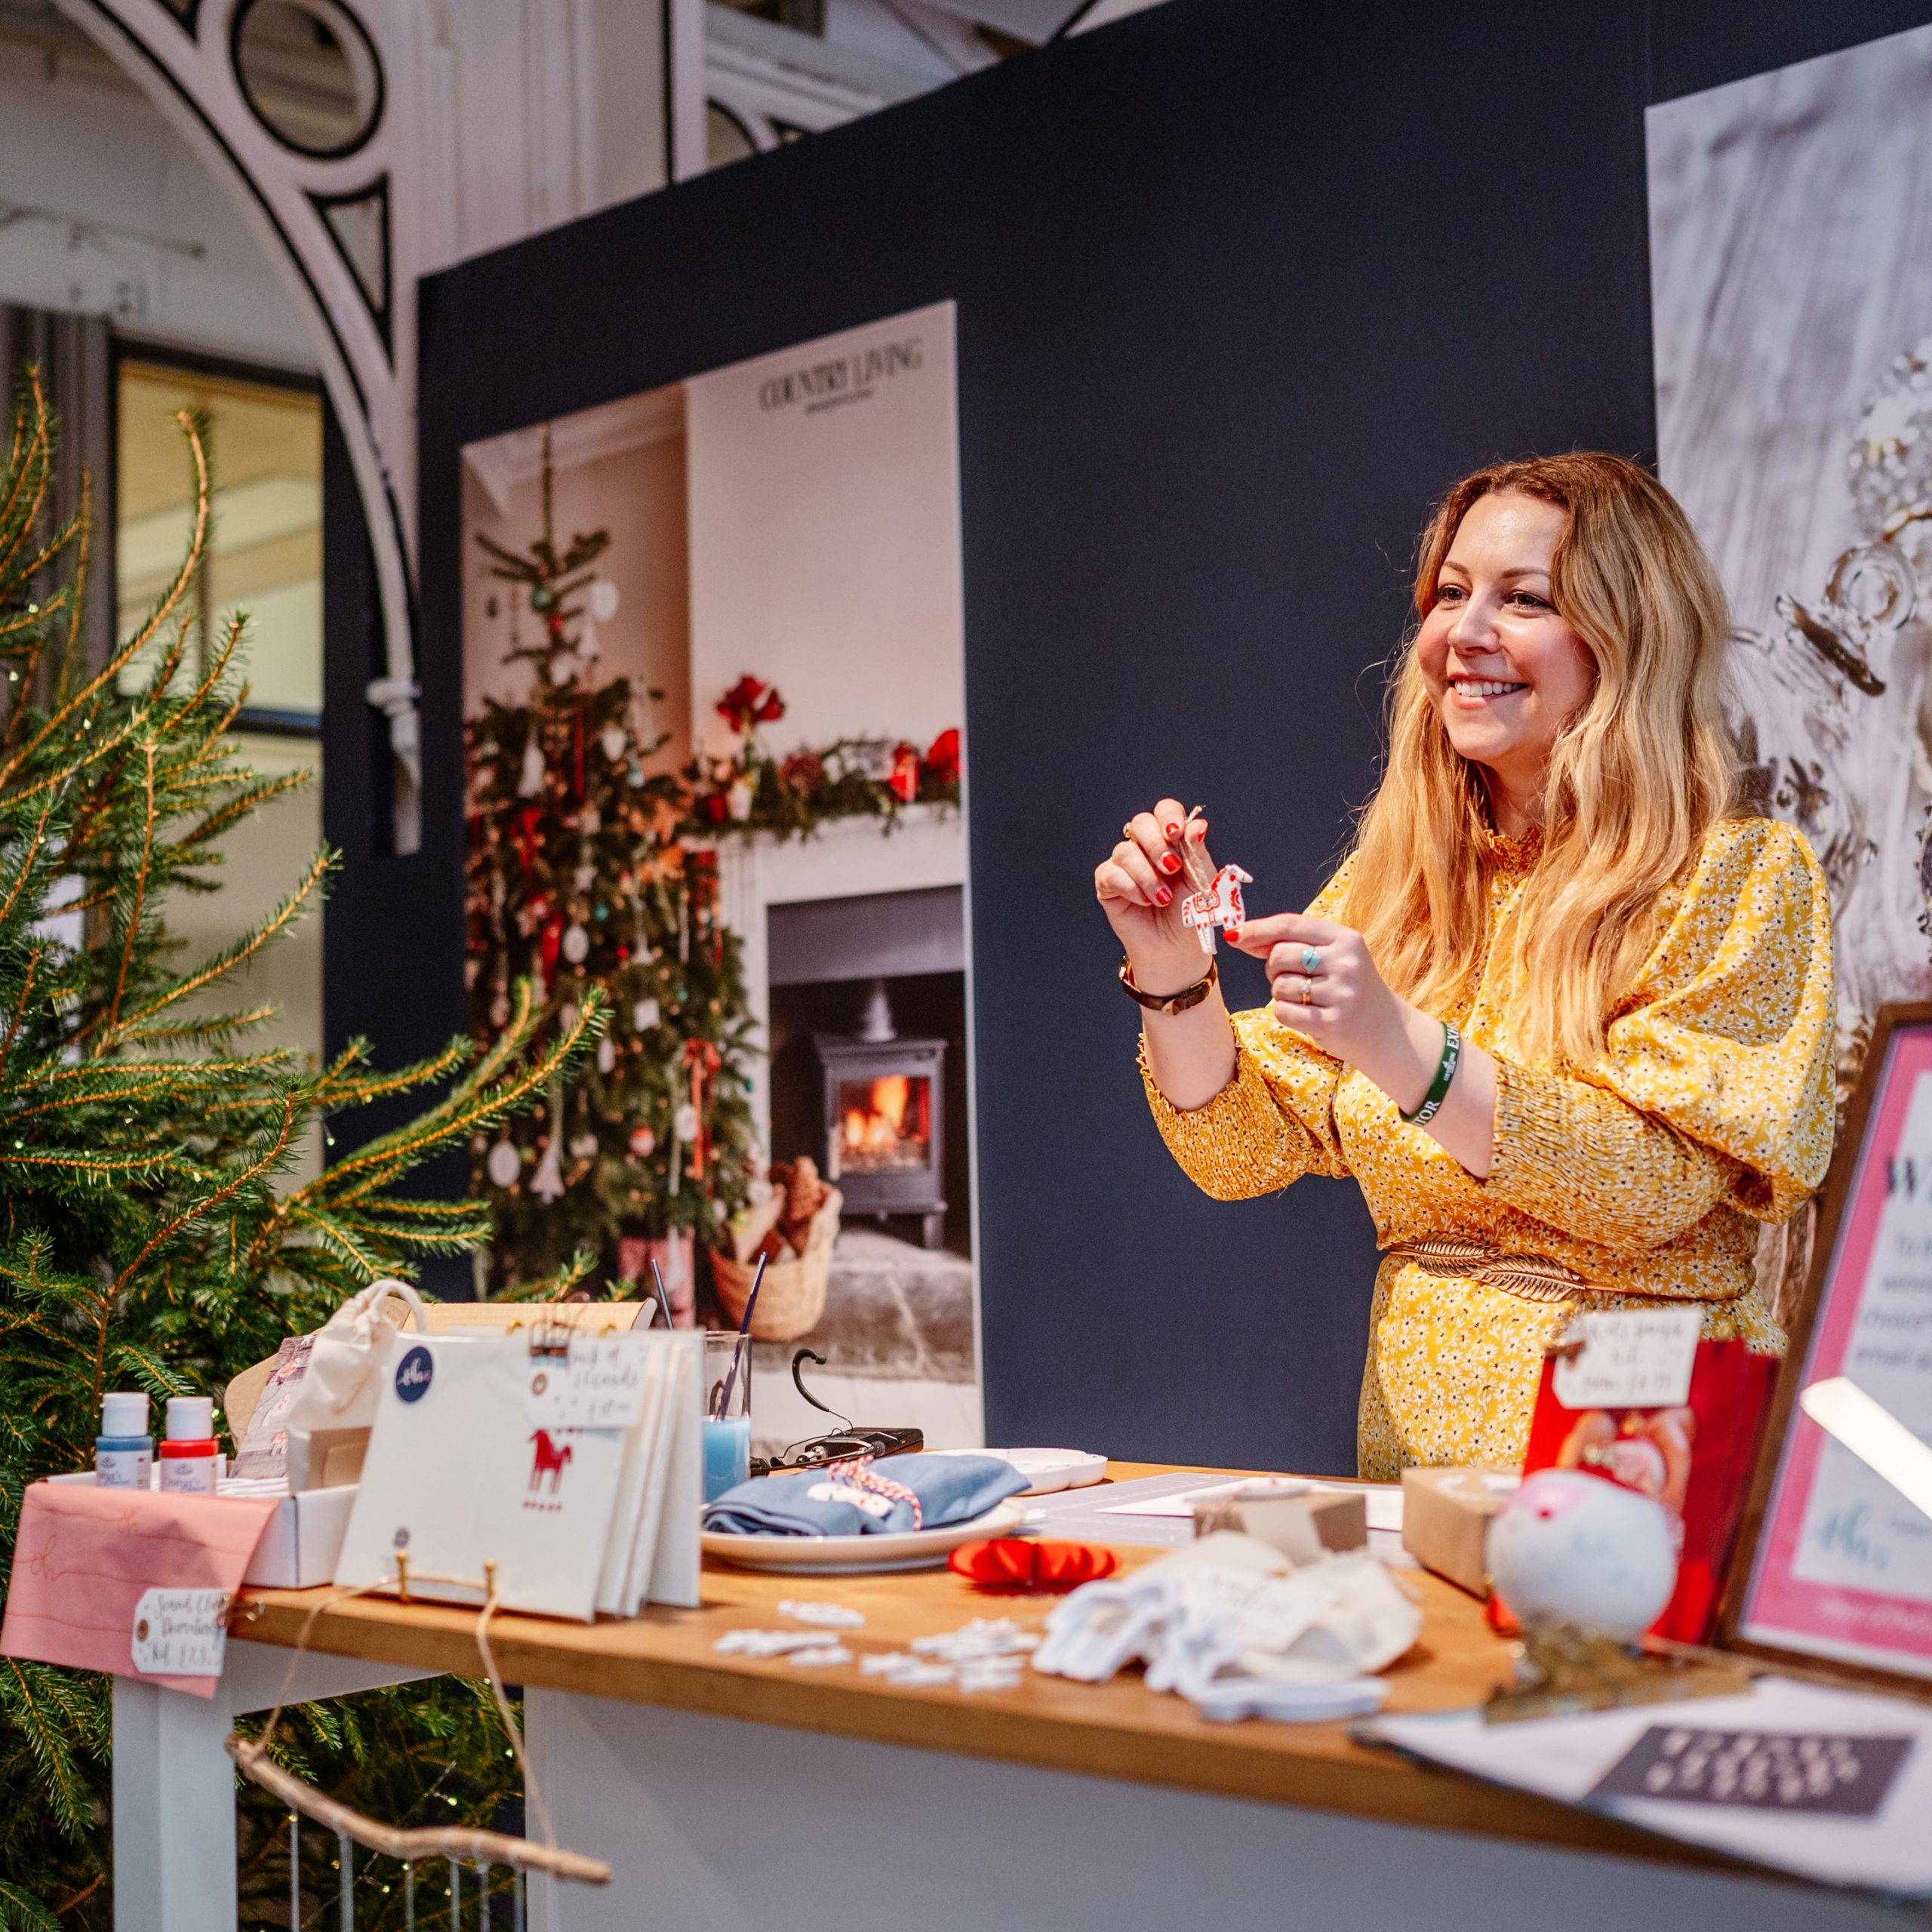 Country Living Christmas Fayre 2022